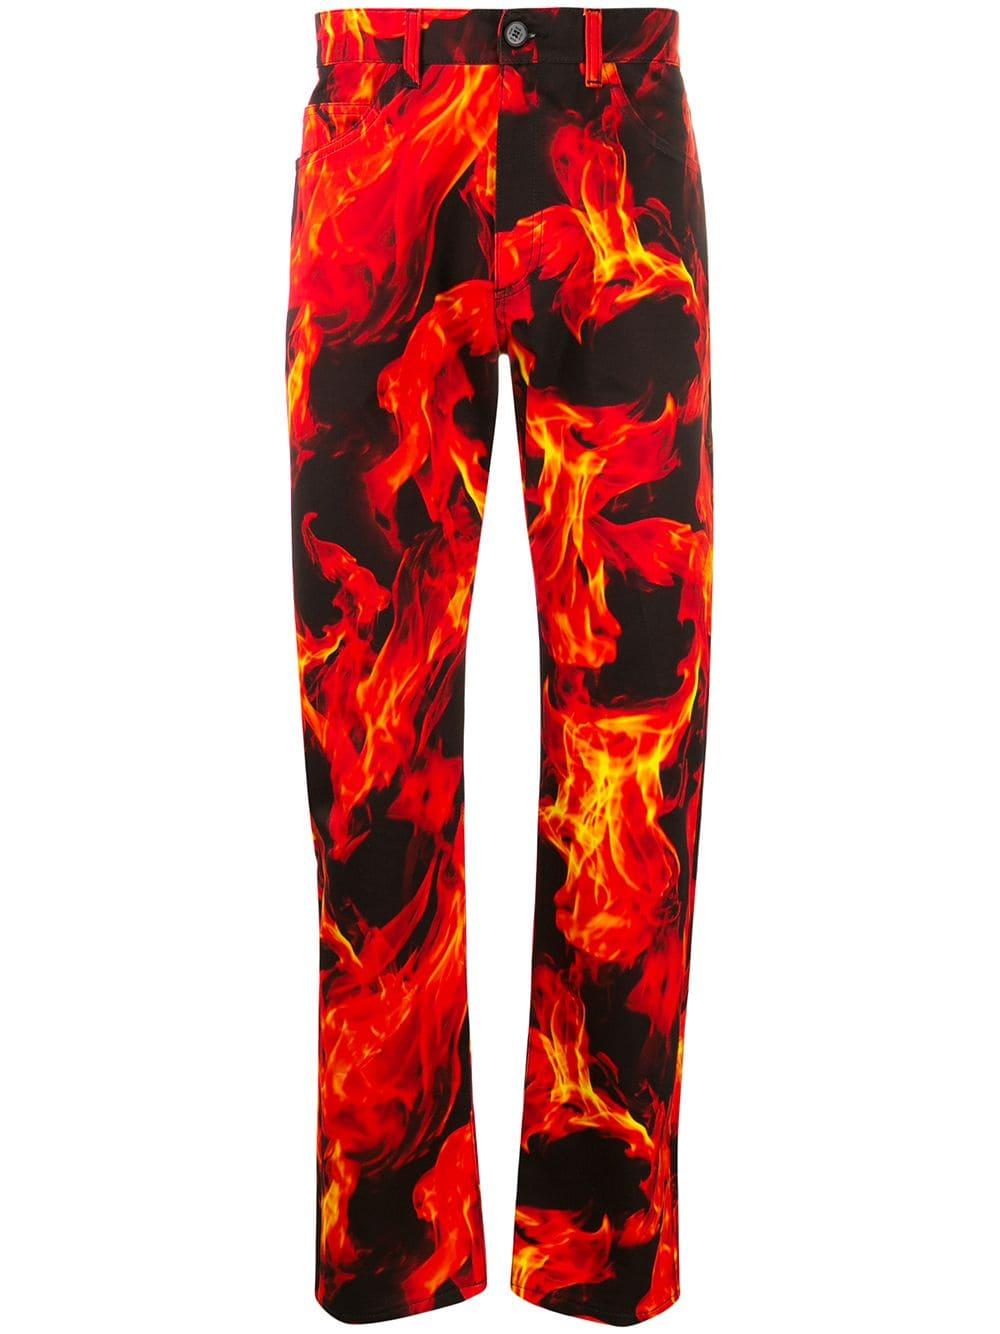 MSGM Denim Flame Print Jeans in Red for Men - Lyst